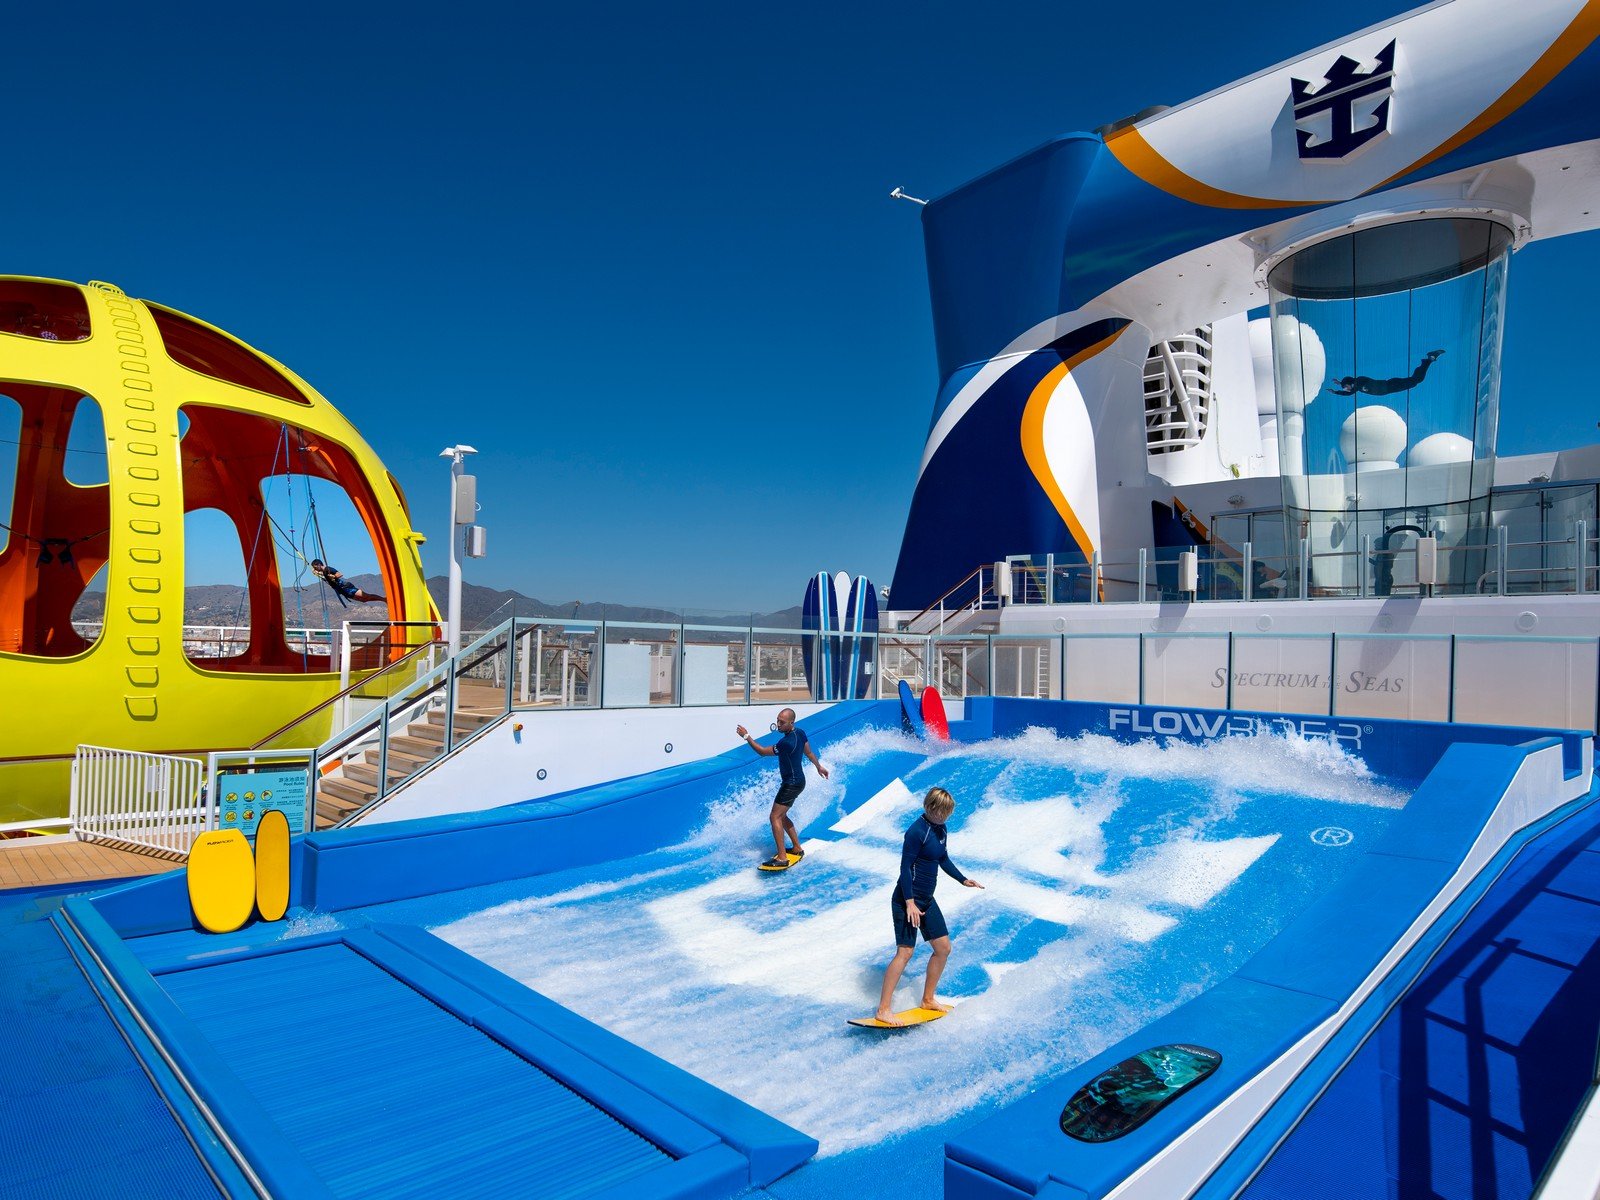 Top 14 best free things to do on a Royal Caribbean cruise | Royal